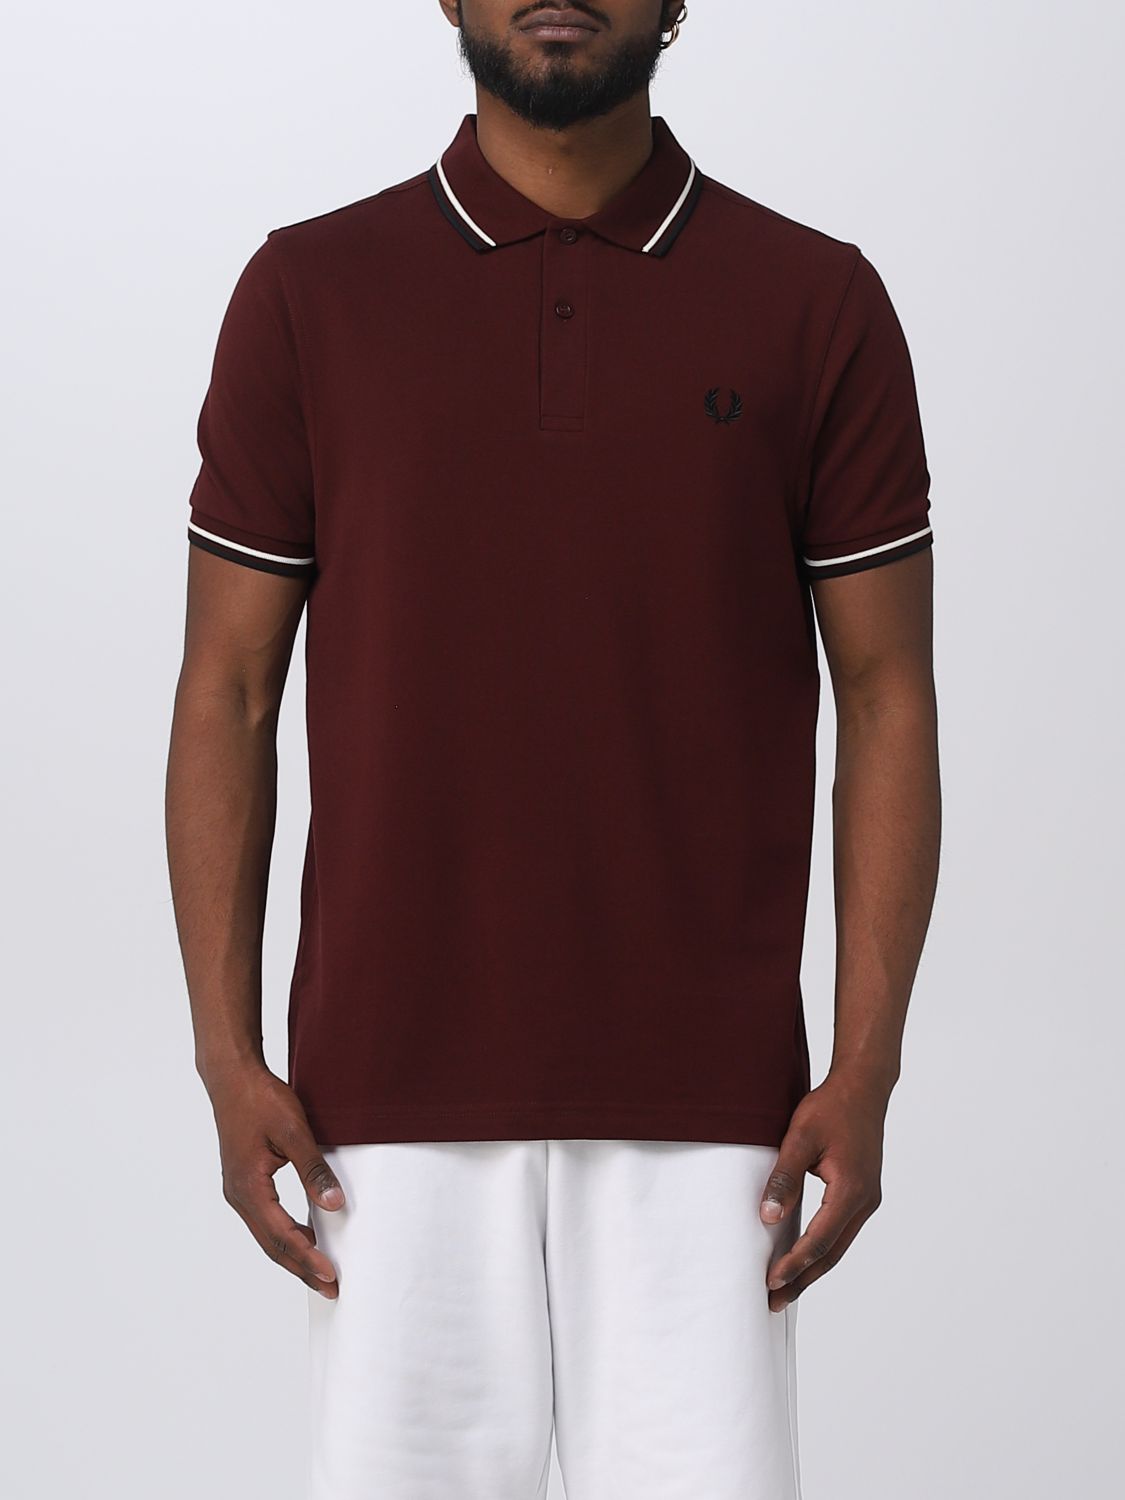 Fred Perry Outlet: polo shirt for man - Burgundy | Fred Perry polo ...